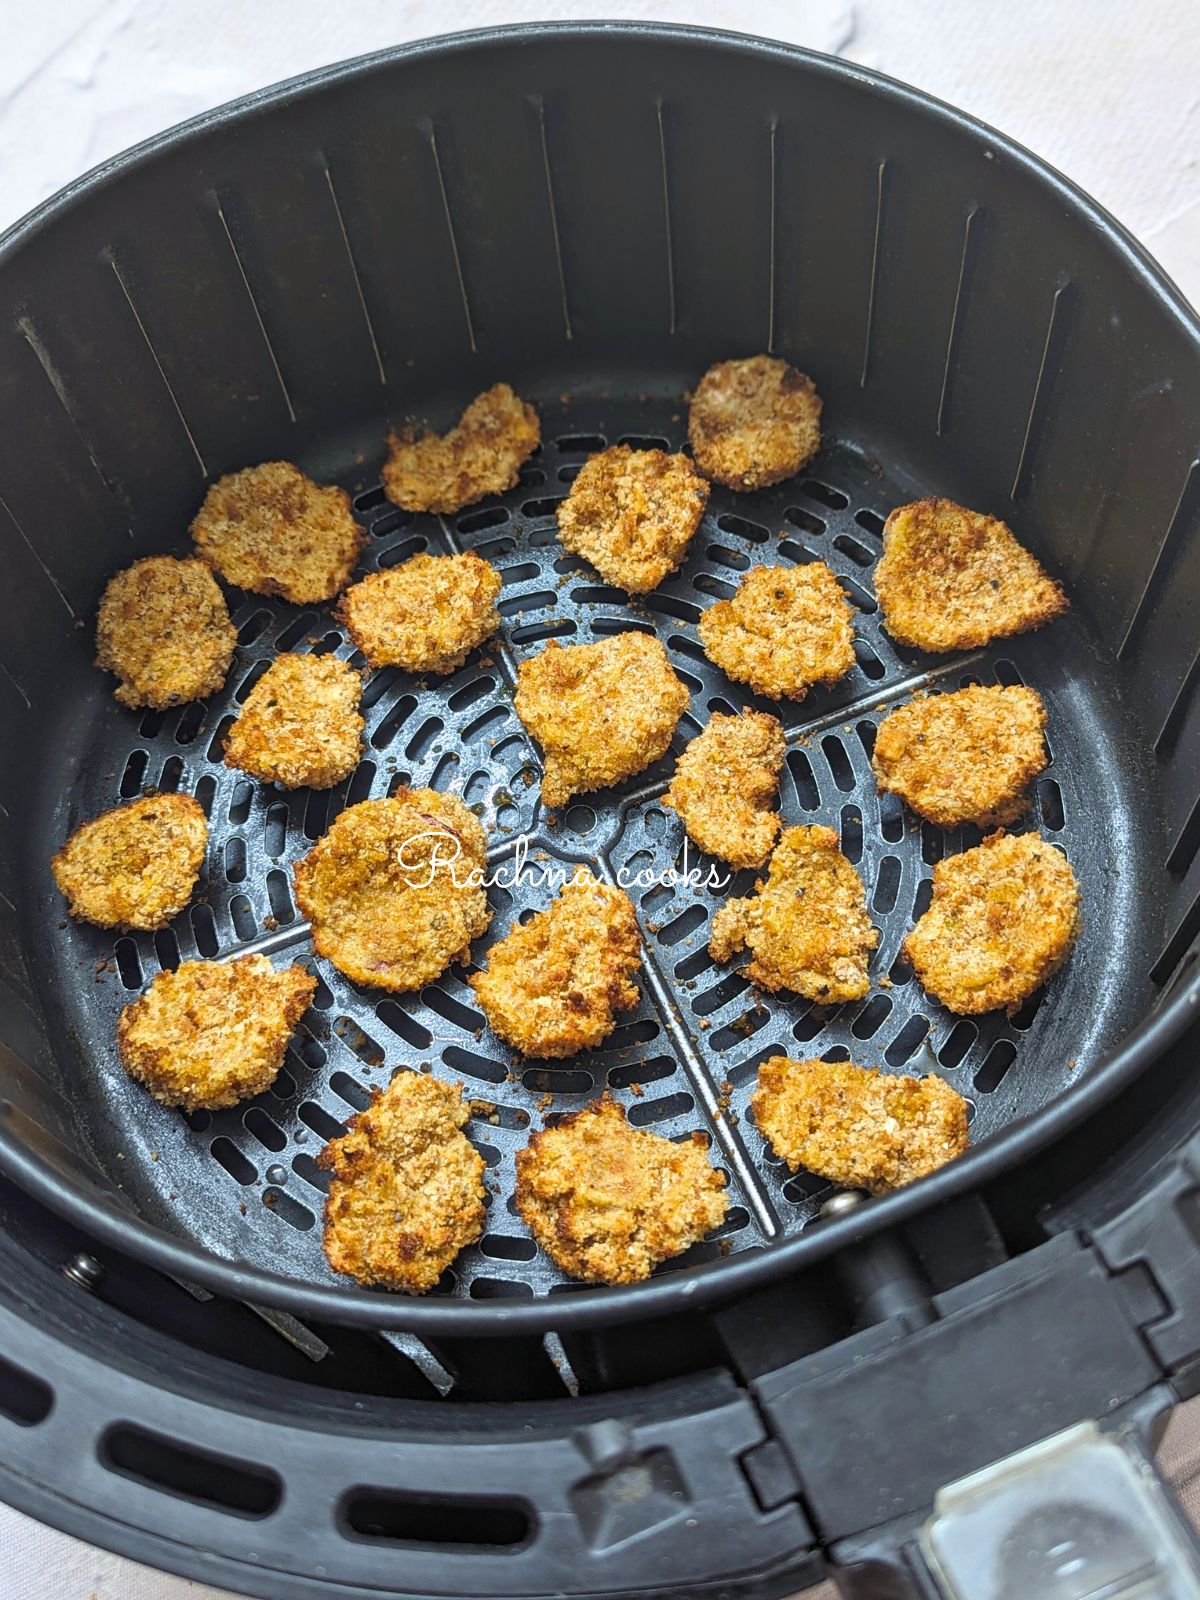 Crunchy onion petals after air frying in air fryer basket.